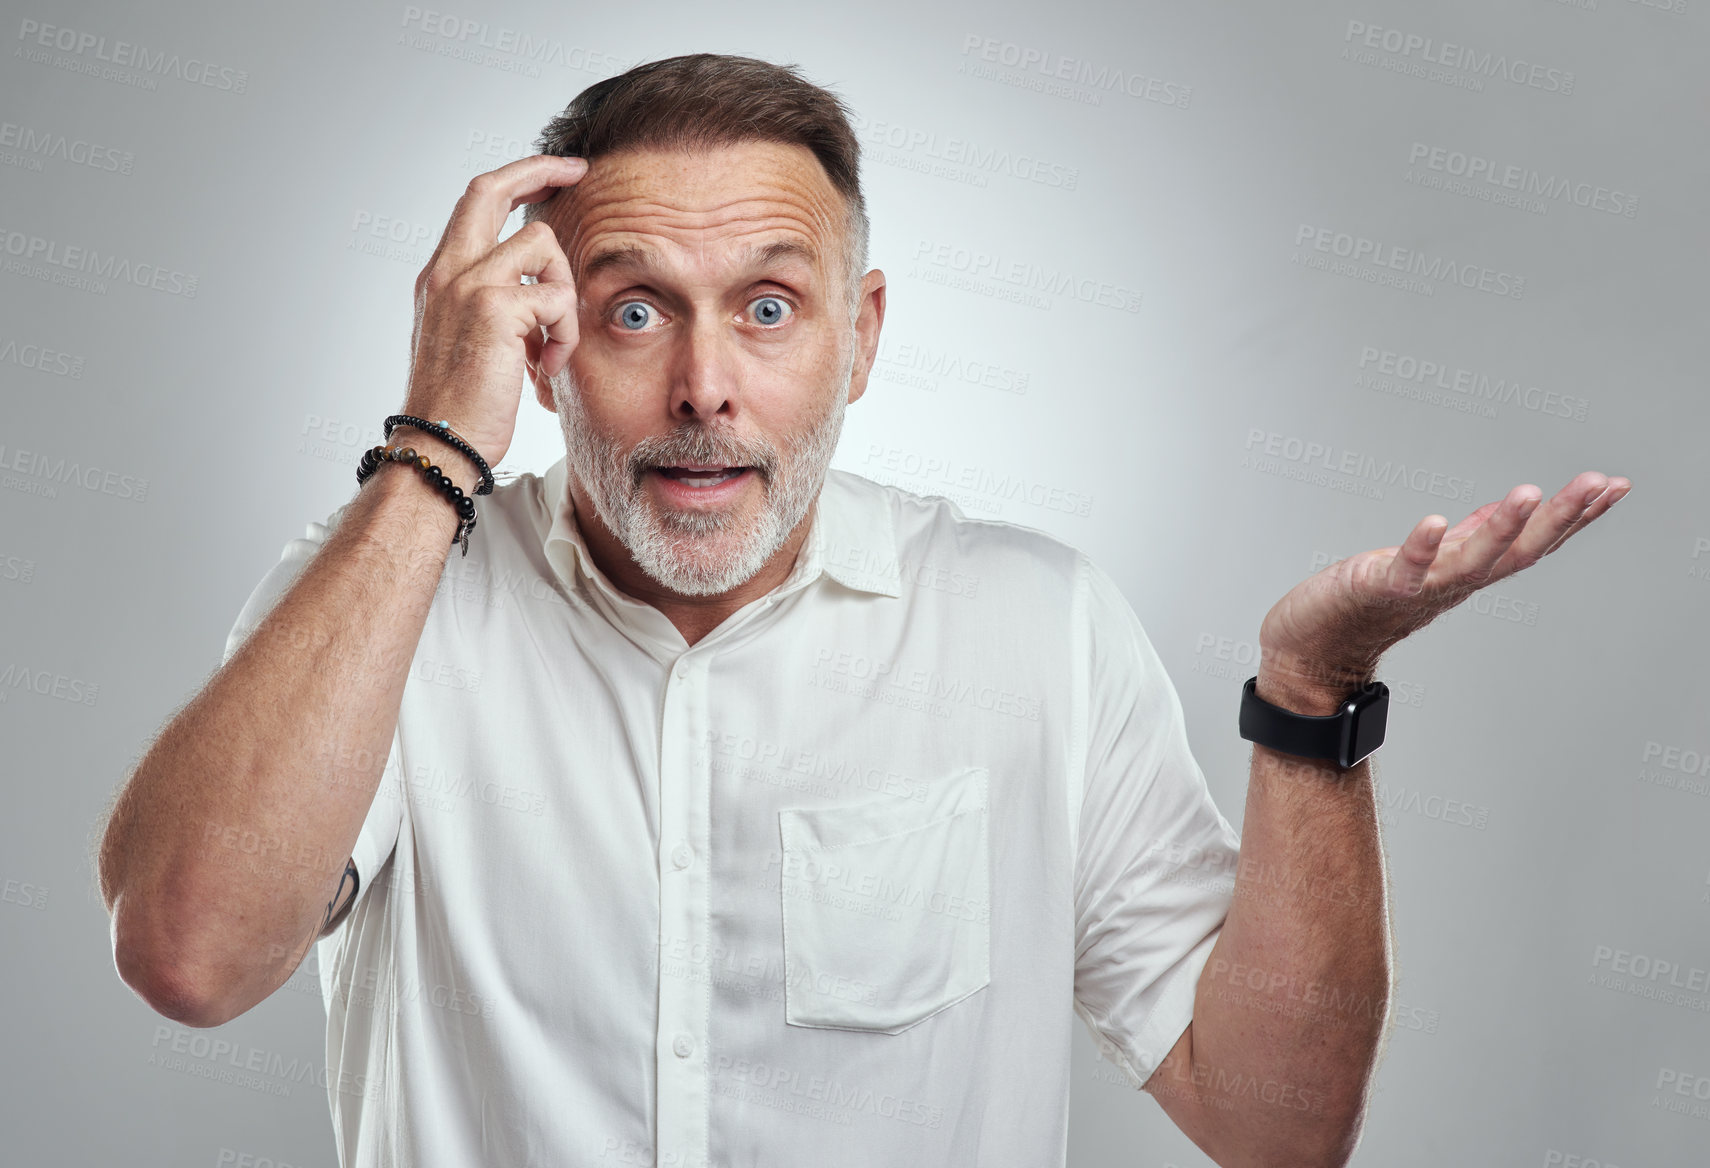 Buy stock photo Studio portrait of a mature man looking confused against a grey background